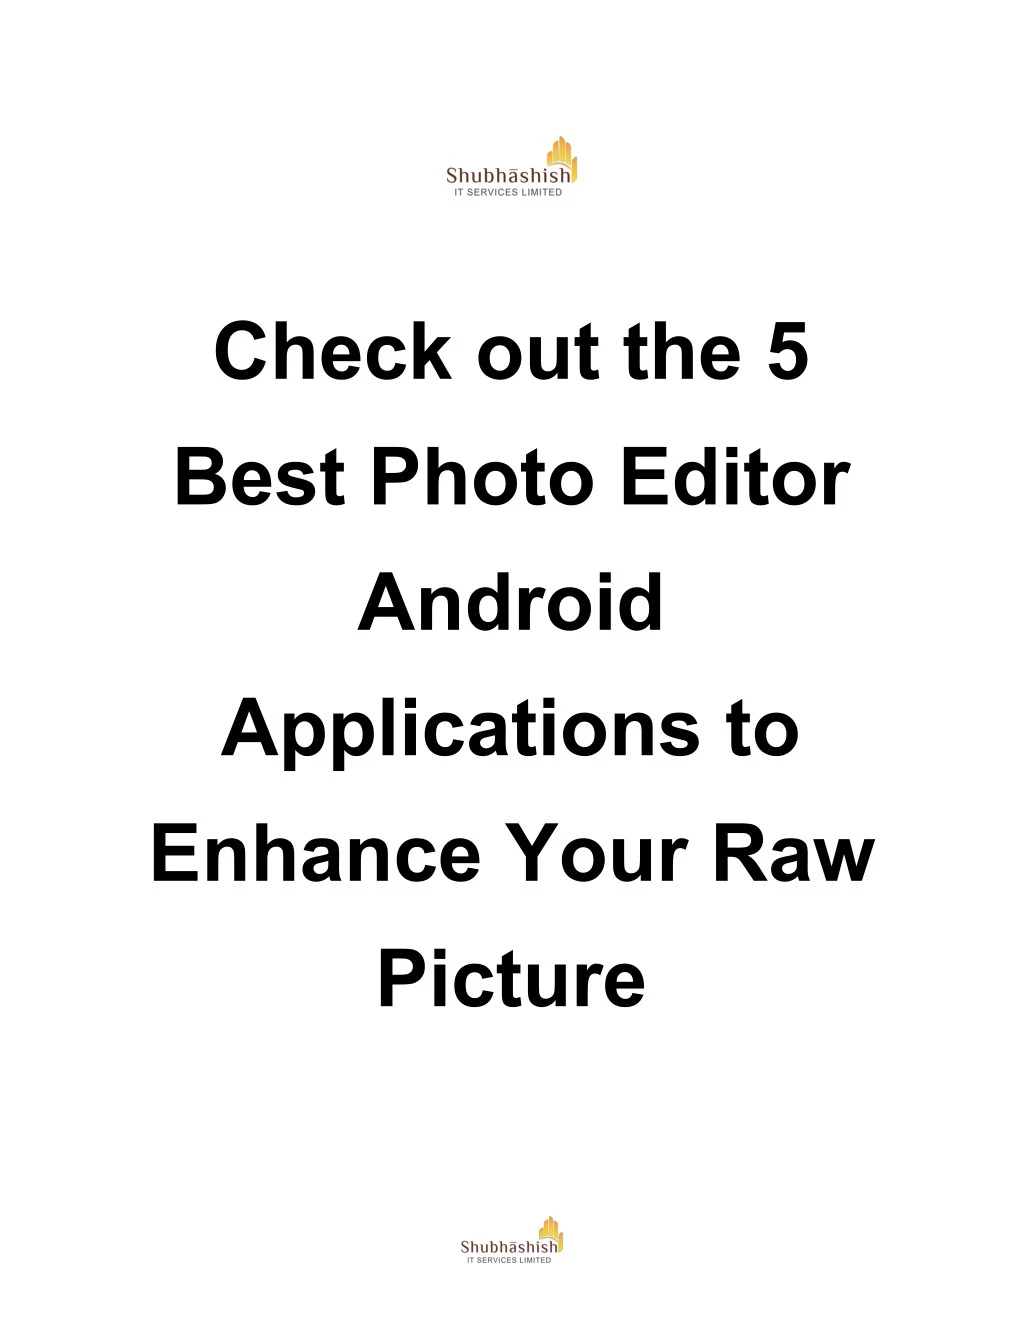 check out the 5 best photo editor android